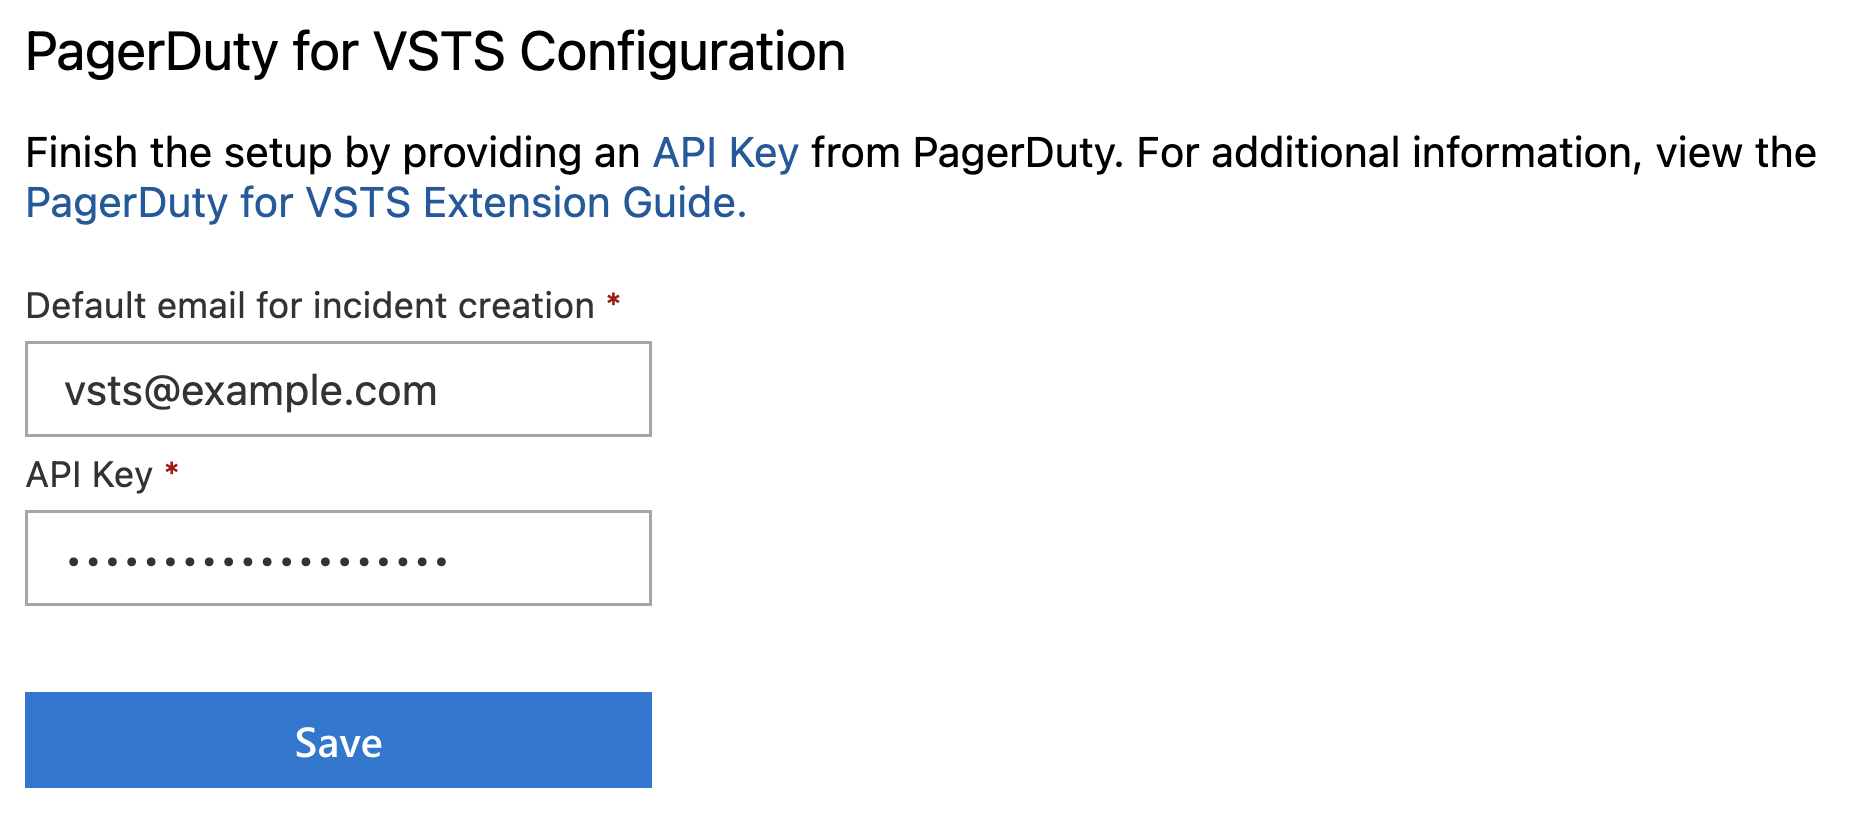 PagerDuty user email and API key